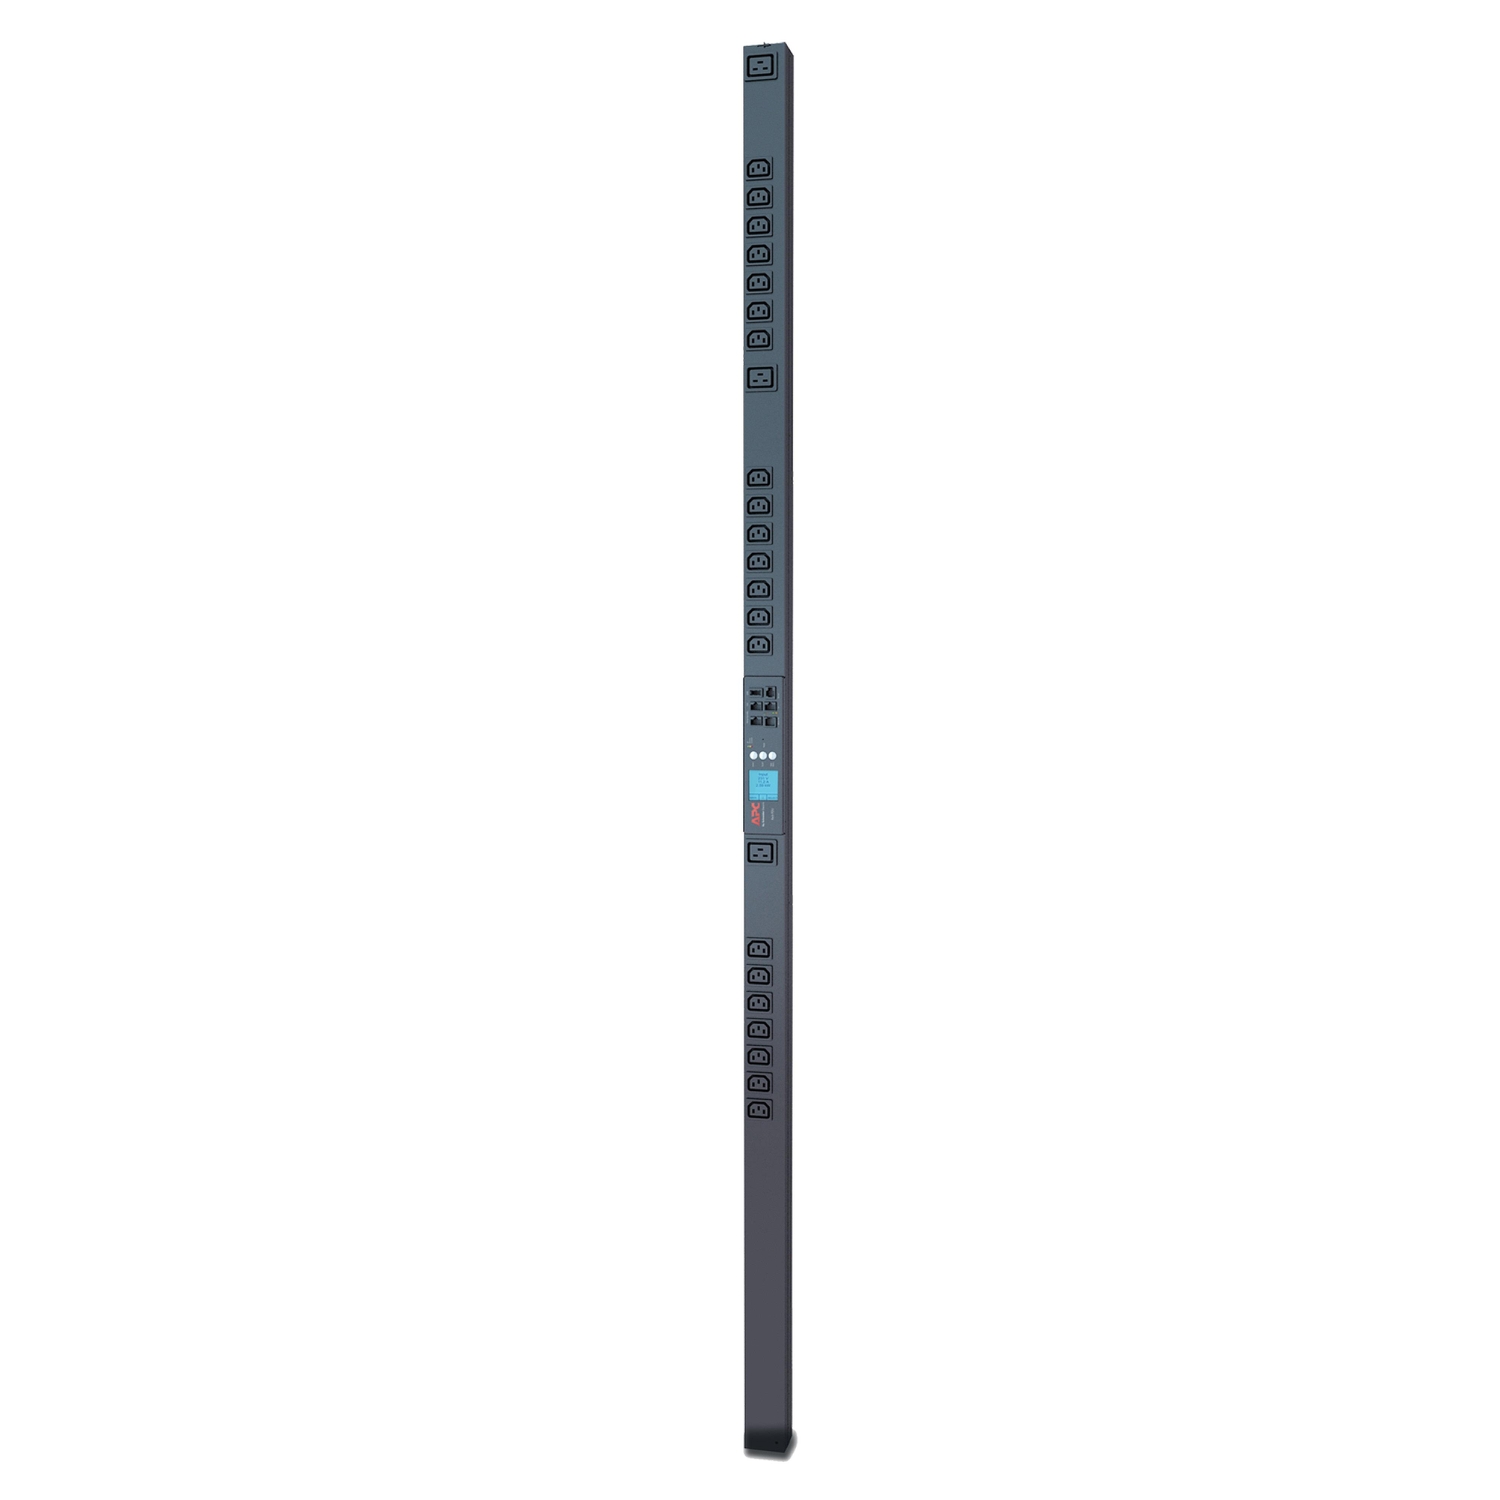 APC Rack PDU 2G, Metered-by-Outlet, ZeroU, 16A, 100-240V, (21) C13 (3) C19